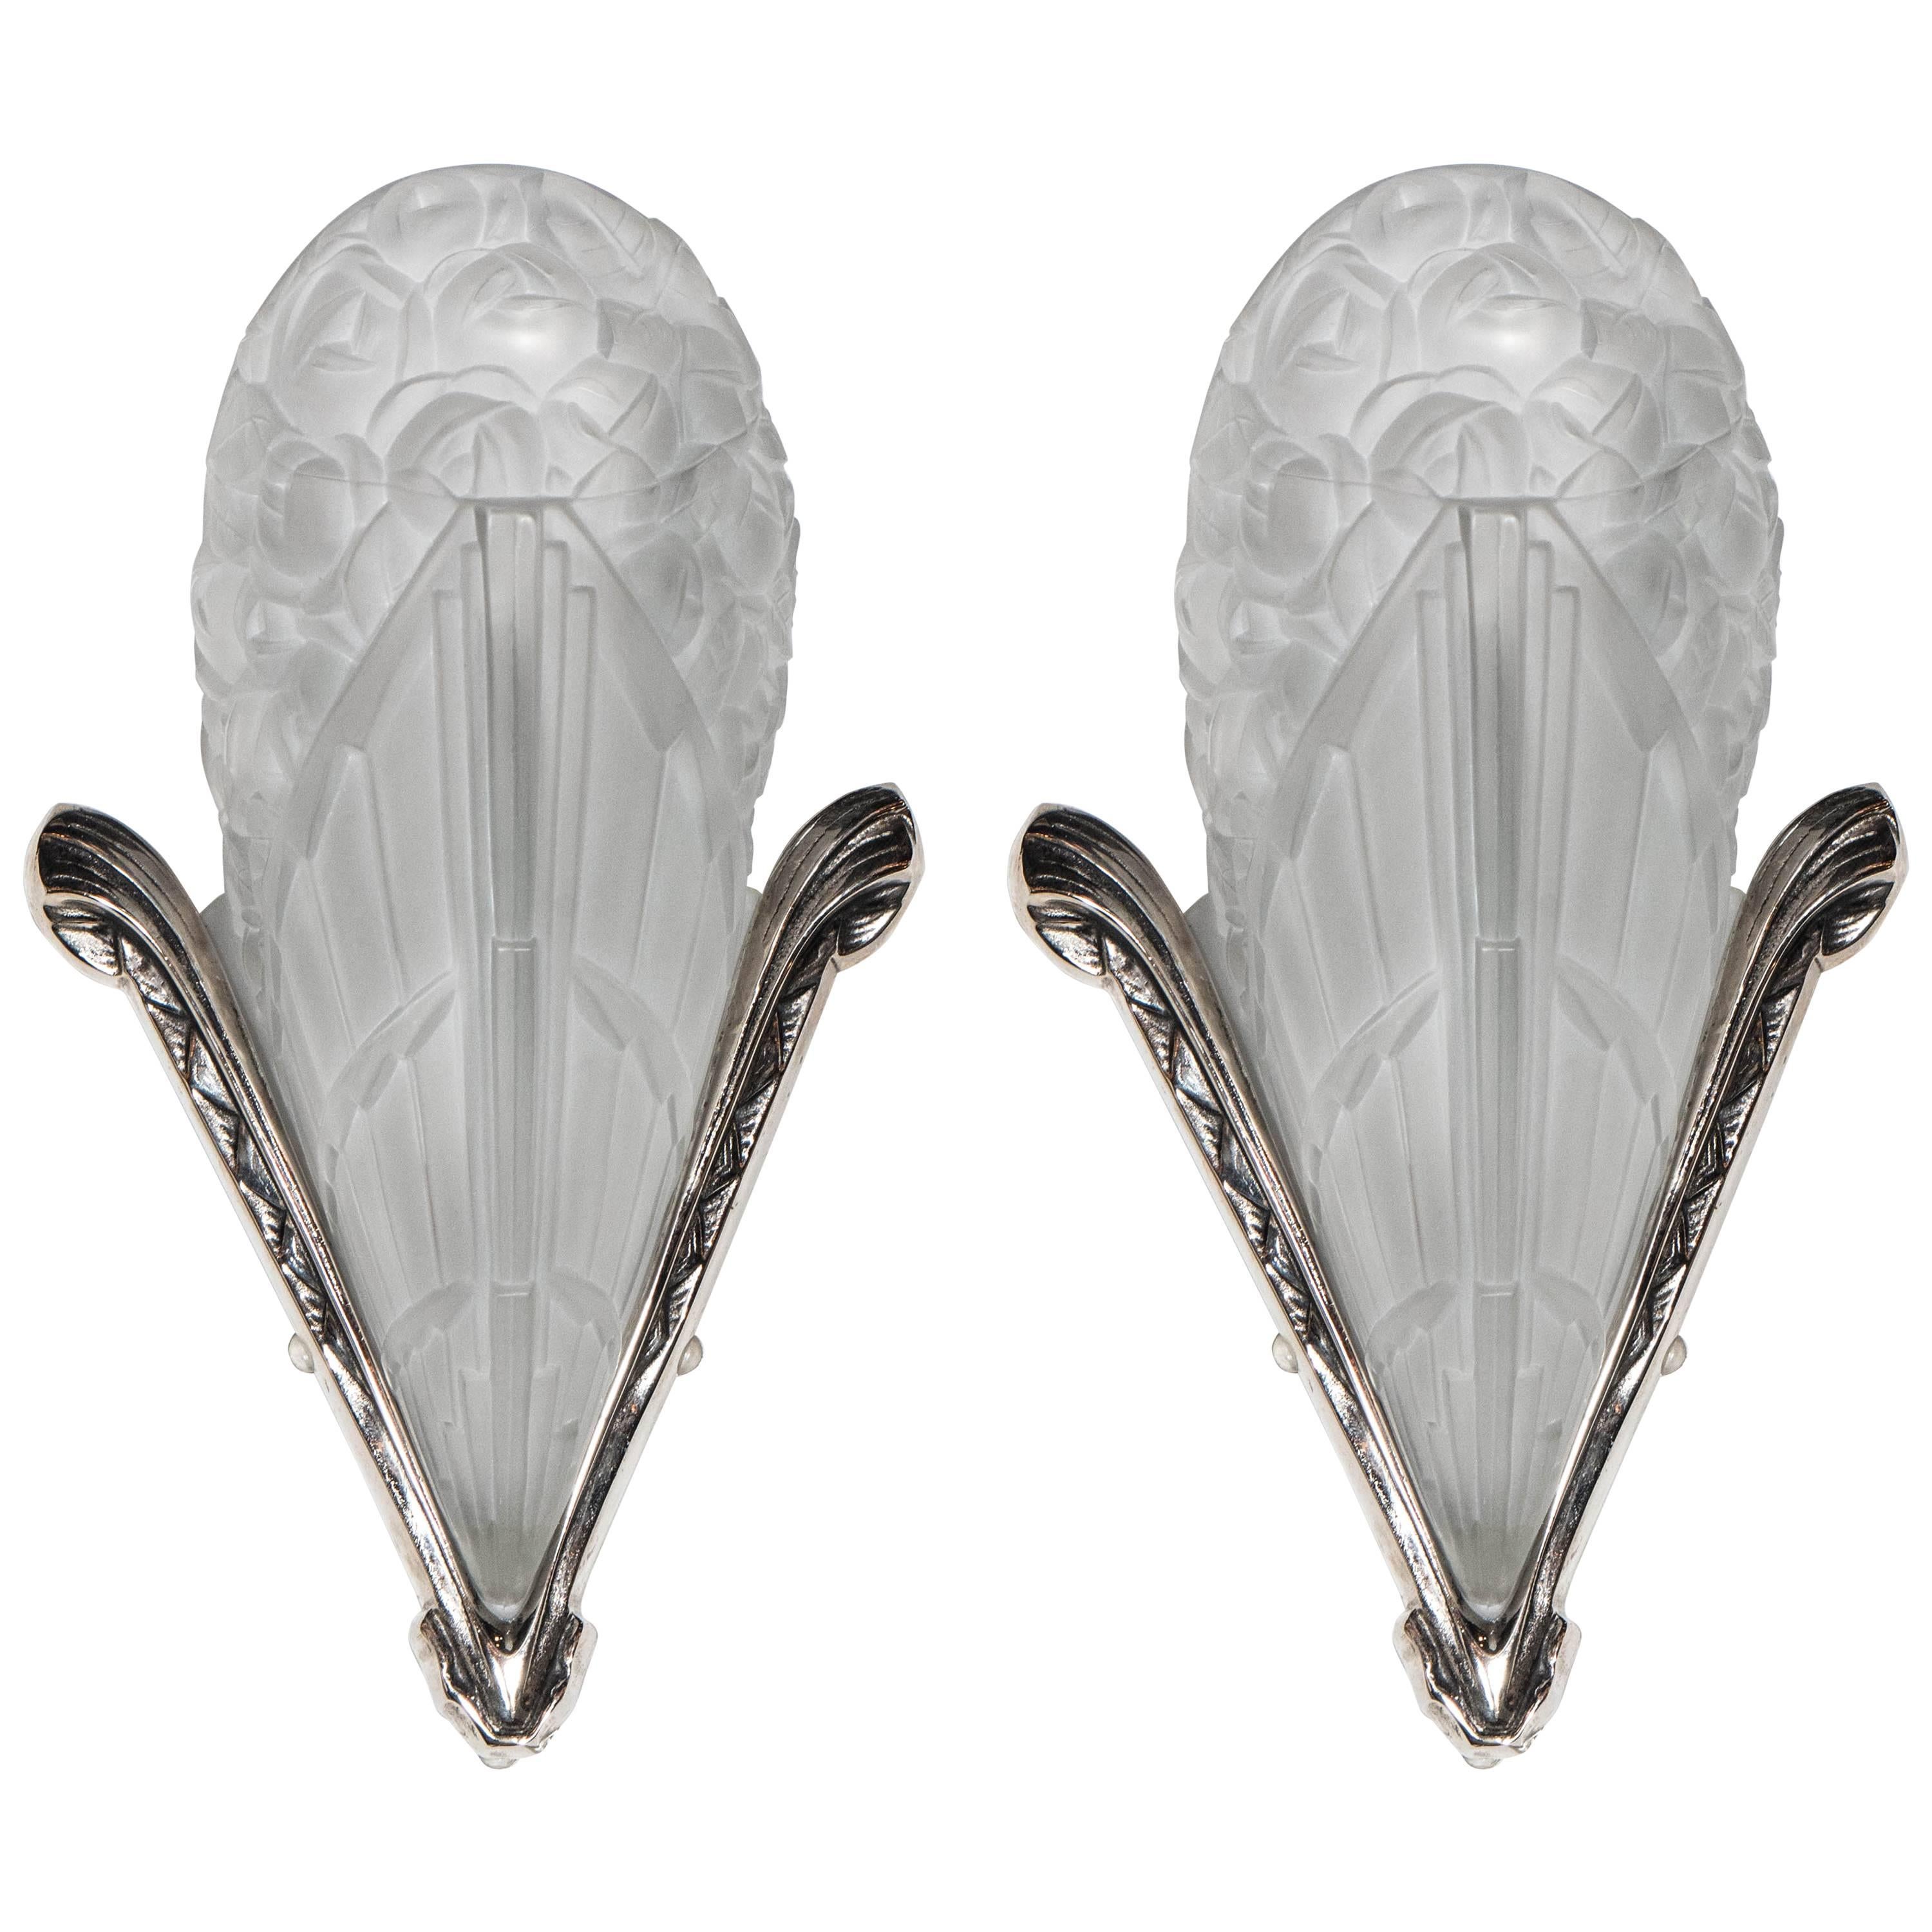 Pair of Gorgeous French Art Deco Relief Glass Sconces by Degue with Bouquet Moti